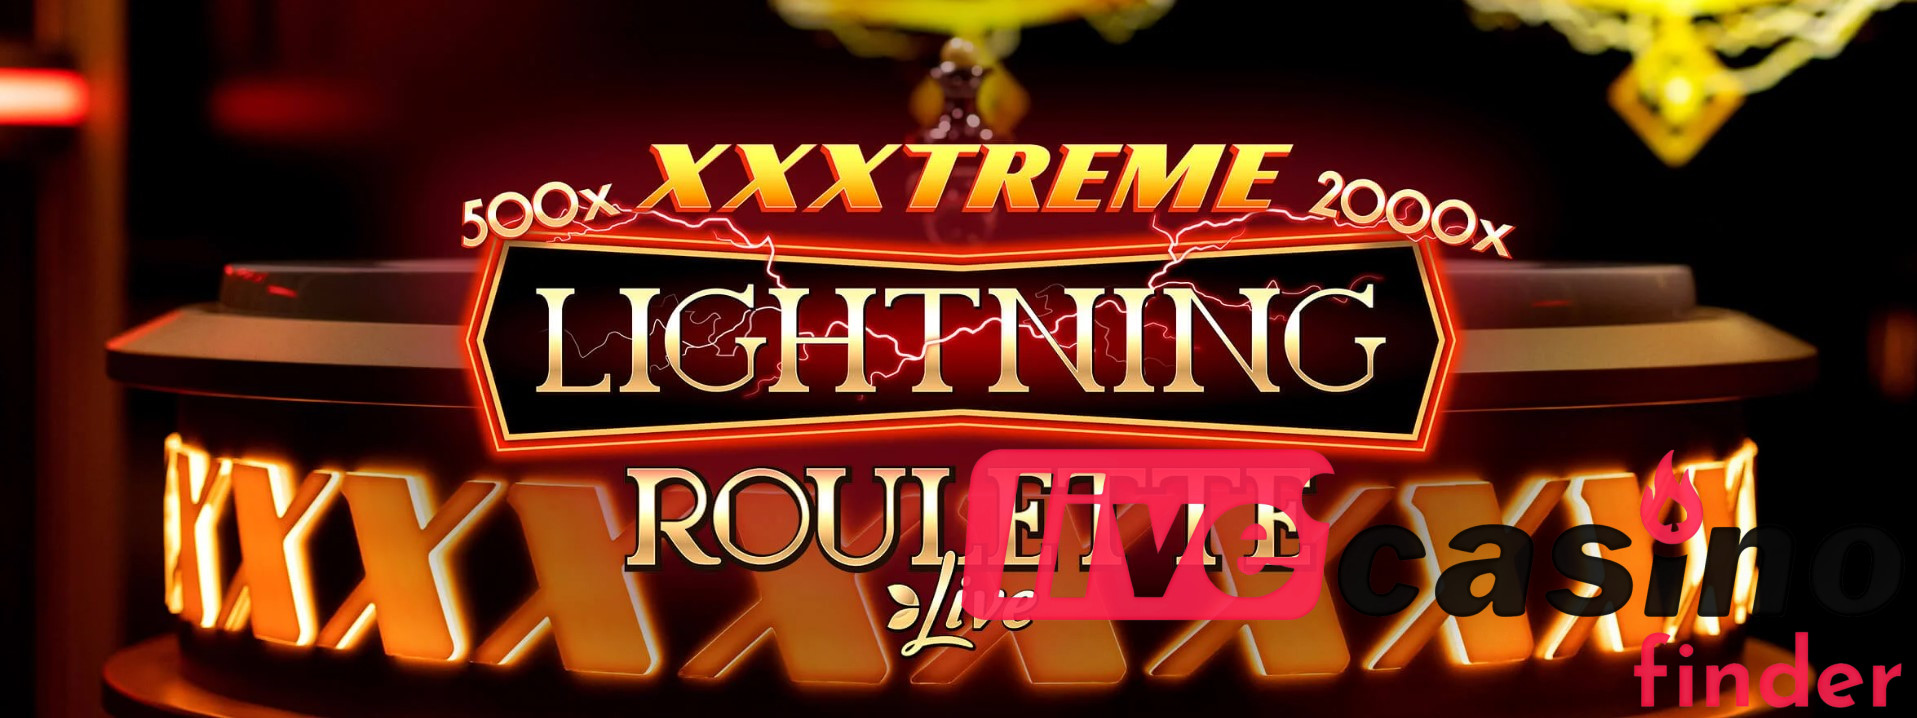 Live XXXTreme Lightning Roulette Game.